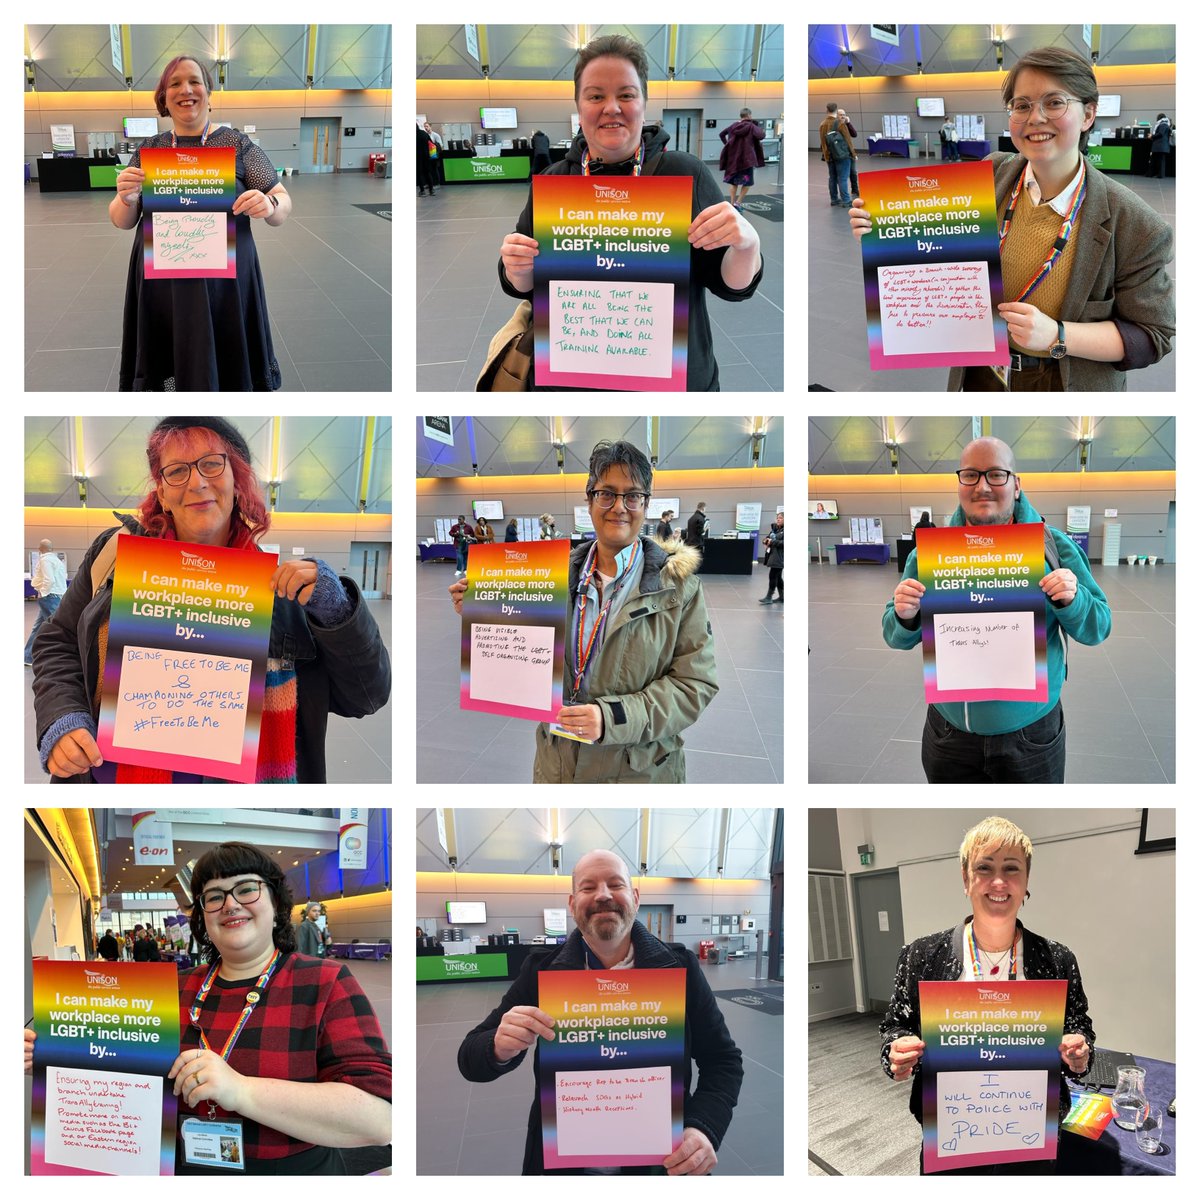 How will you make your workplace more LGBT+ inclusive in @unisontheunion's Year of LGBT+ workers? Are your workplace policies inclusive? Check out our workplace policy checklist to see if your workplace is inclusive of all LGBT+ workers 👇🏳️‍⚧️🏳️‍🌈 unison.org.uk/content/upload…